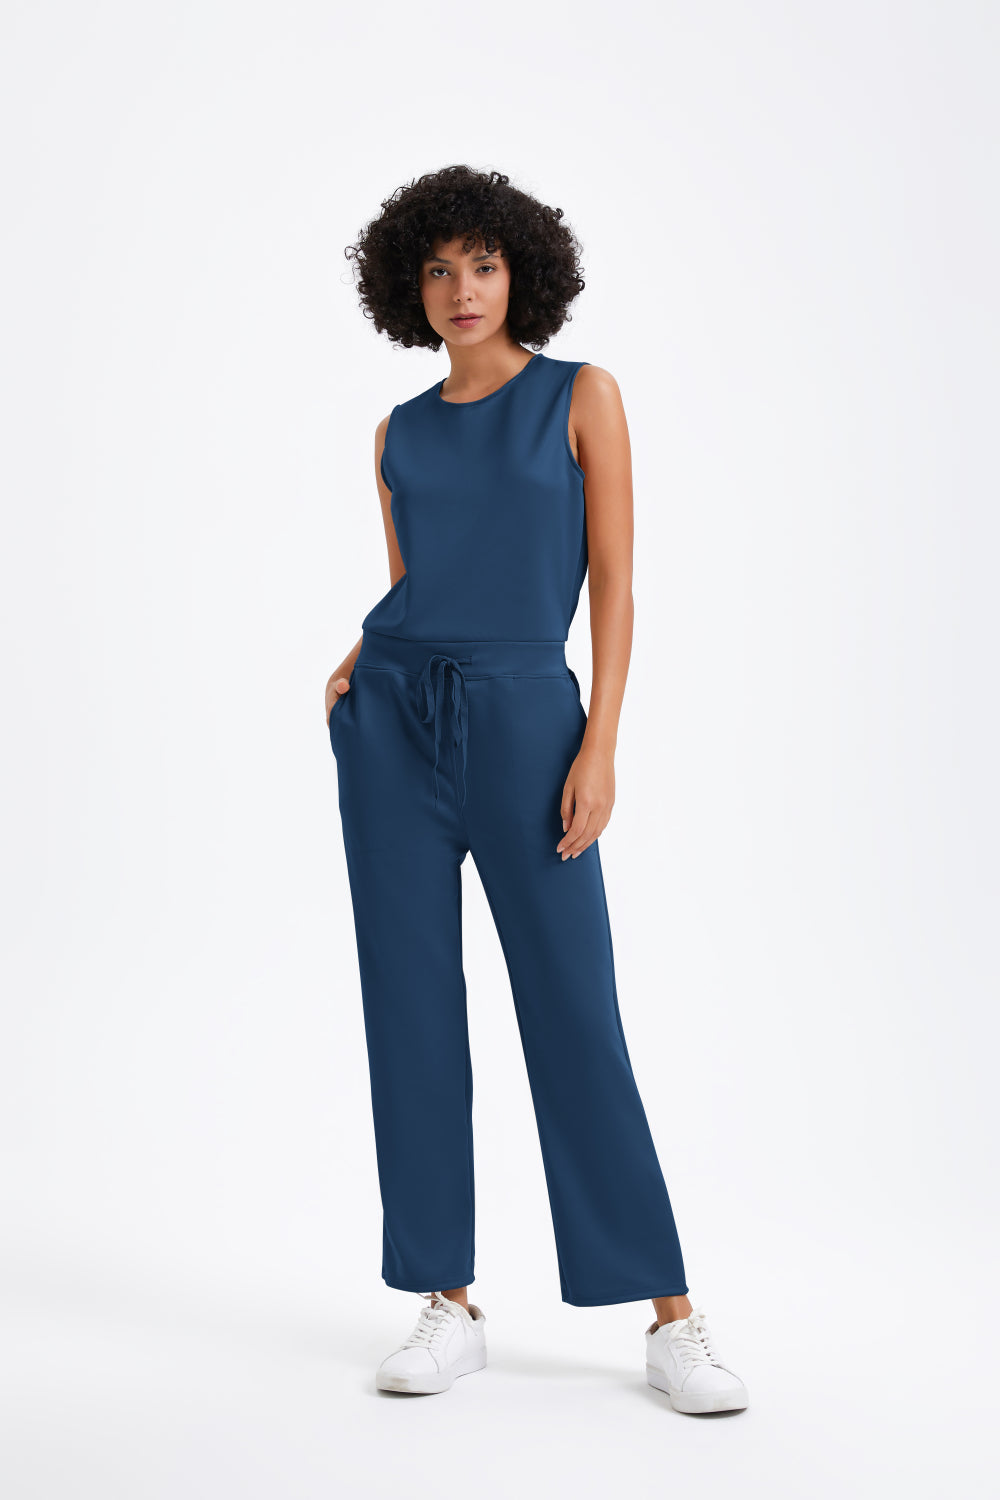 Slim casual women's sleeveless solid color v-neck trousers jumpsuit - Buy two and get free shipping!